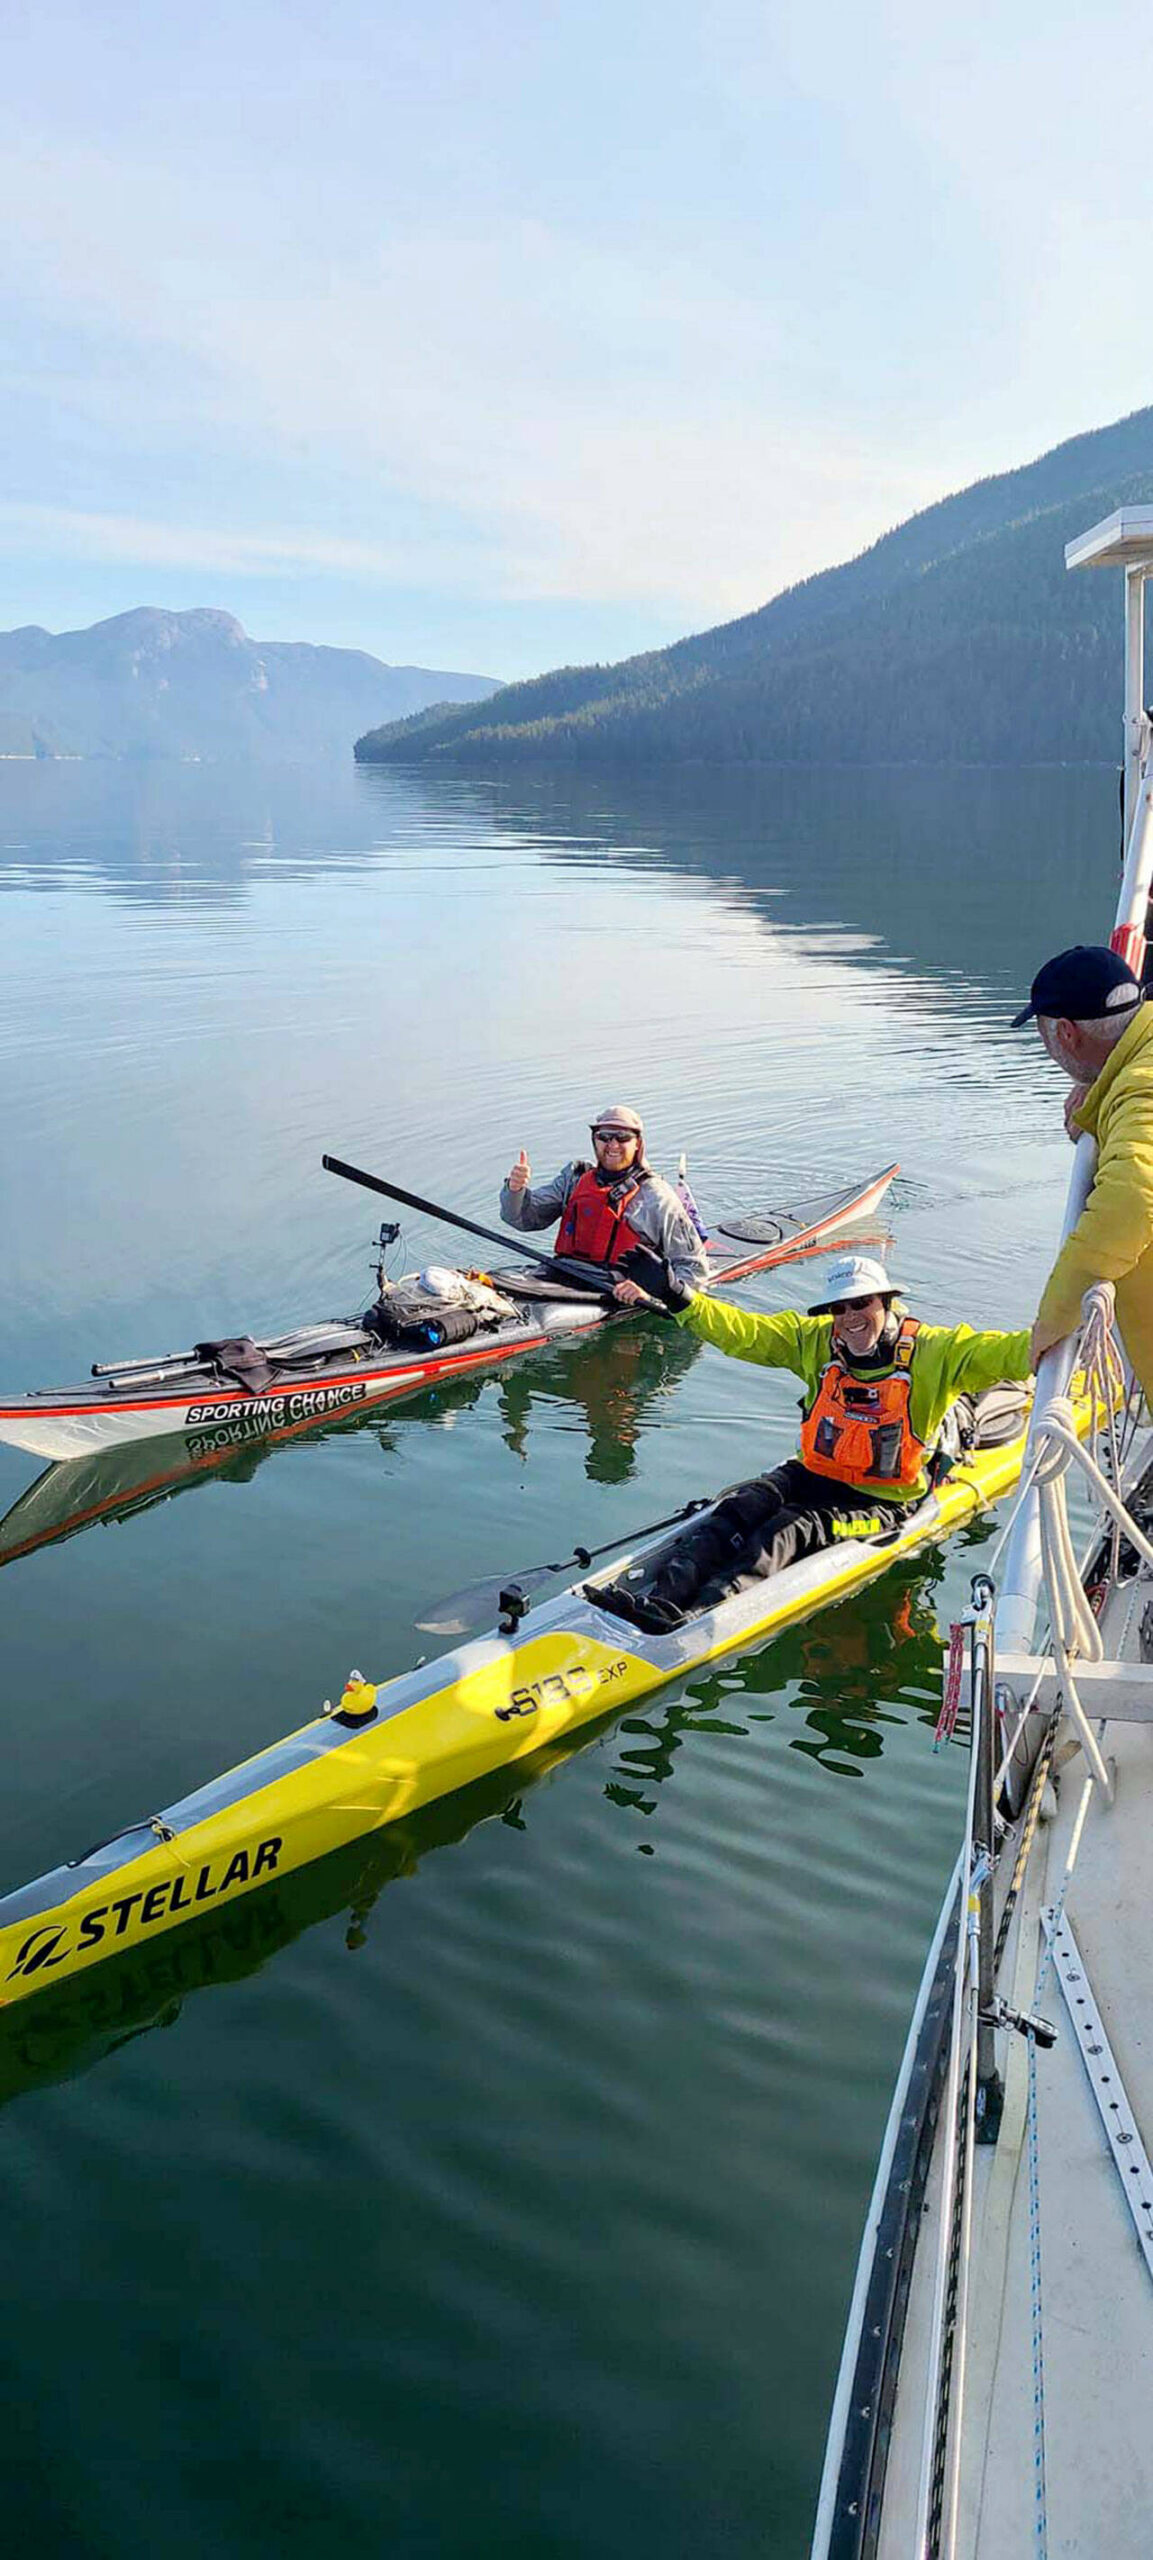 Scott MacDonald of Team Sporting Chance, left, and Stuart Sugden of Team Bella Bella and Beyond, seen near Fraser Reach, British Columbia, on Sunday, were the final two racers to complete the Race to Alaska on Tuesday. They were the 17th and 18th teams, respectively. (Northwest Maritime Center)